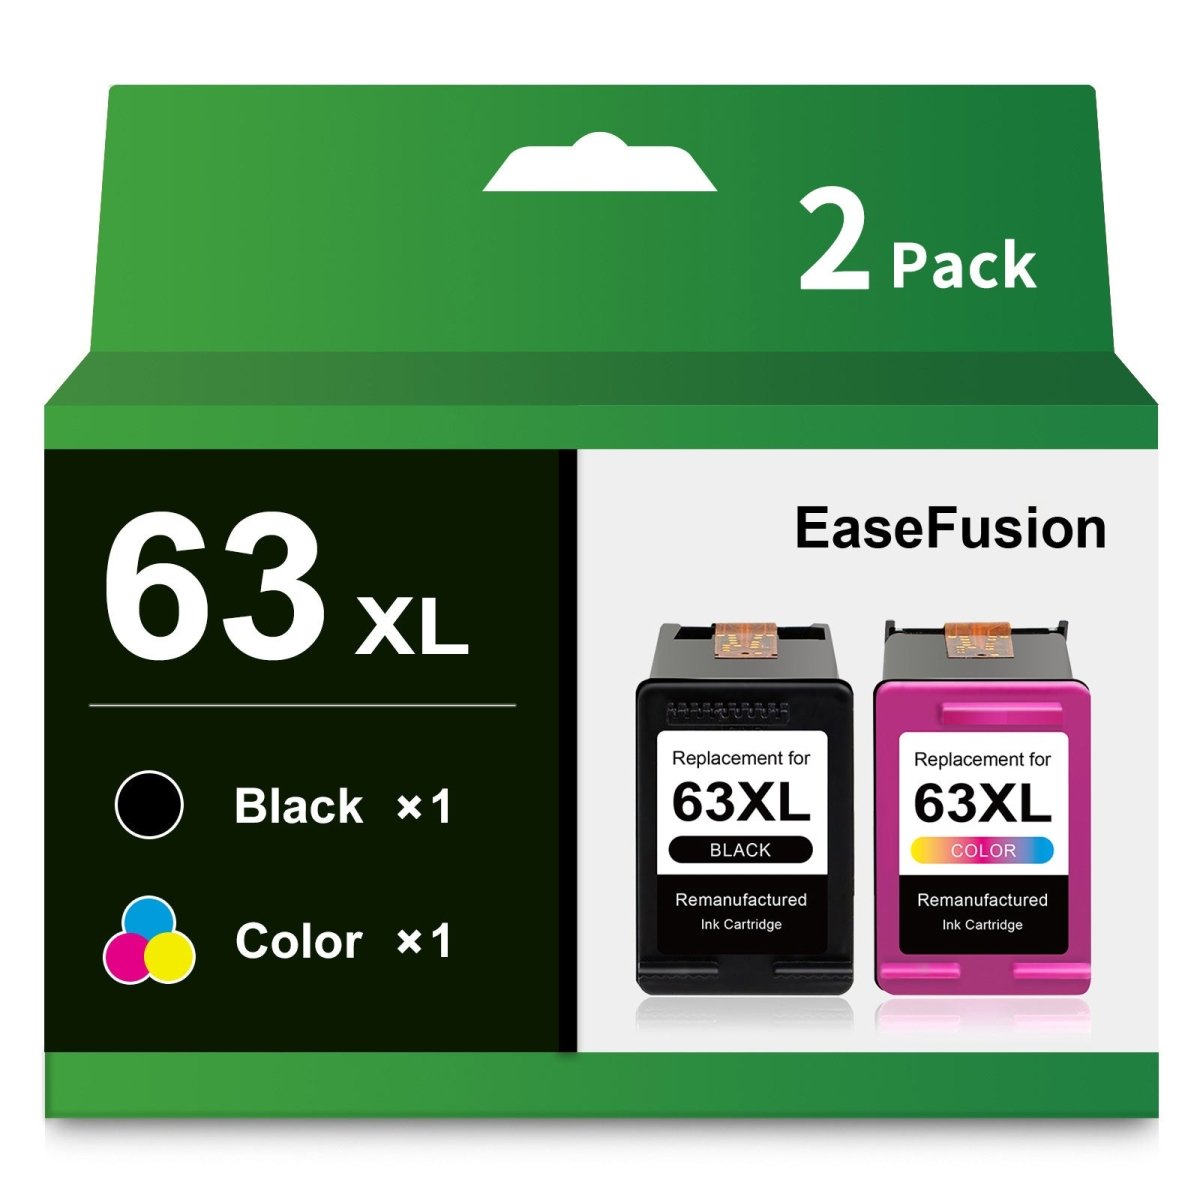 EaseFusion Remanufactured Ink Cartridge Replacement for HP 63XL 63 XL Combo Pack for HP OfficeJet 3830 4650 5255 Envy 4520 Printer (1 Black 1 Tri-Color) - Linford Office:Printer Ink & Toner Cartridge